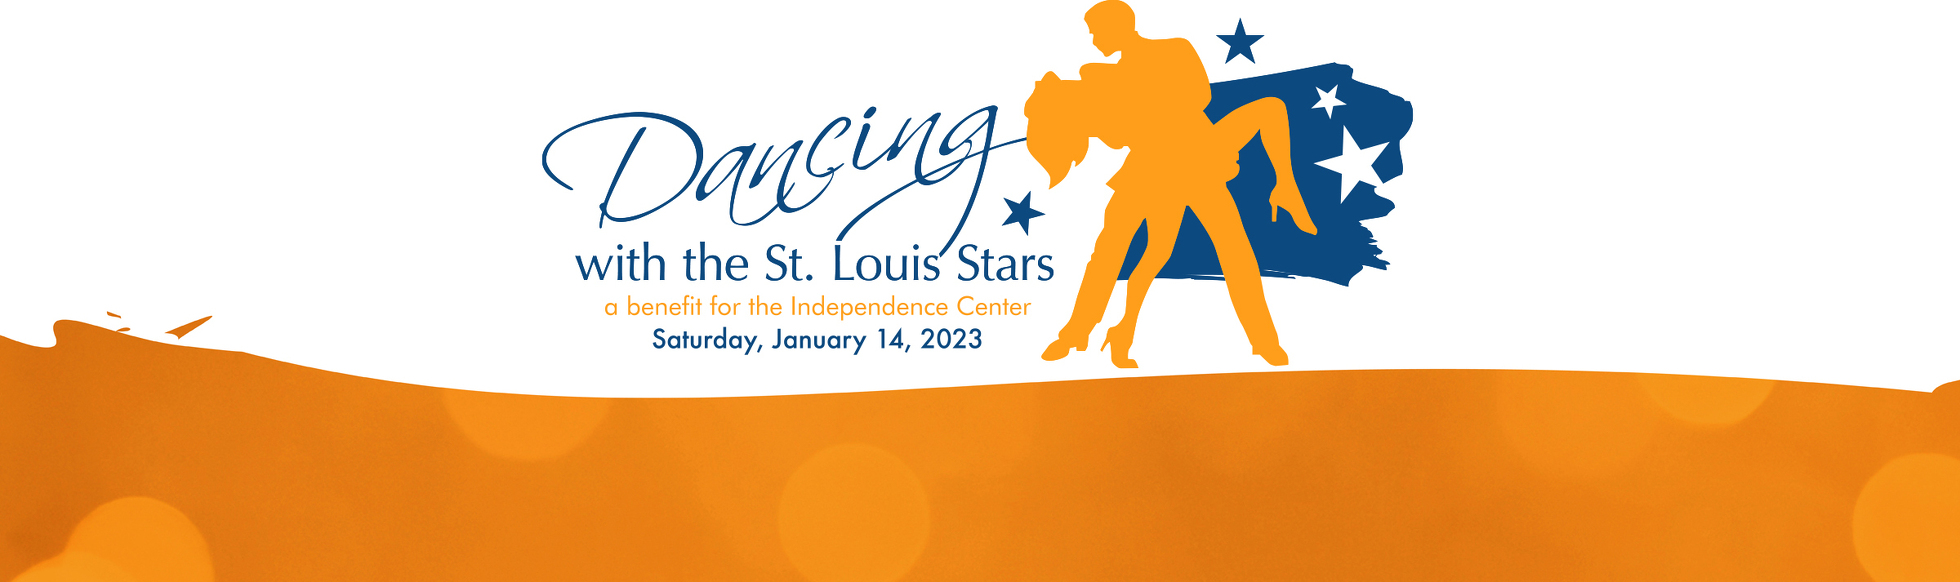 Dancing with the St. Louis Stars 2023